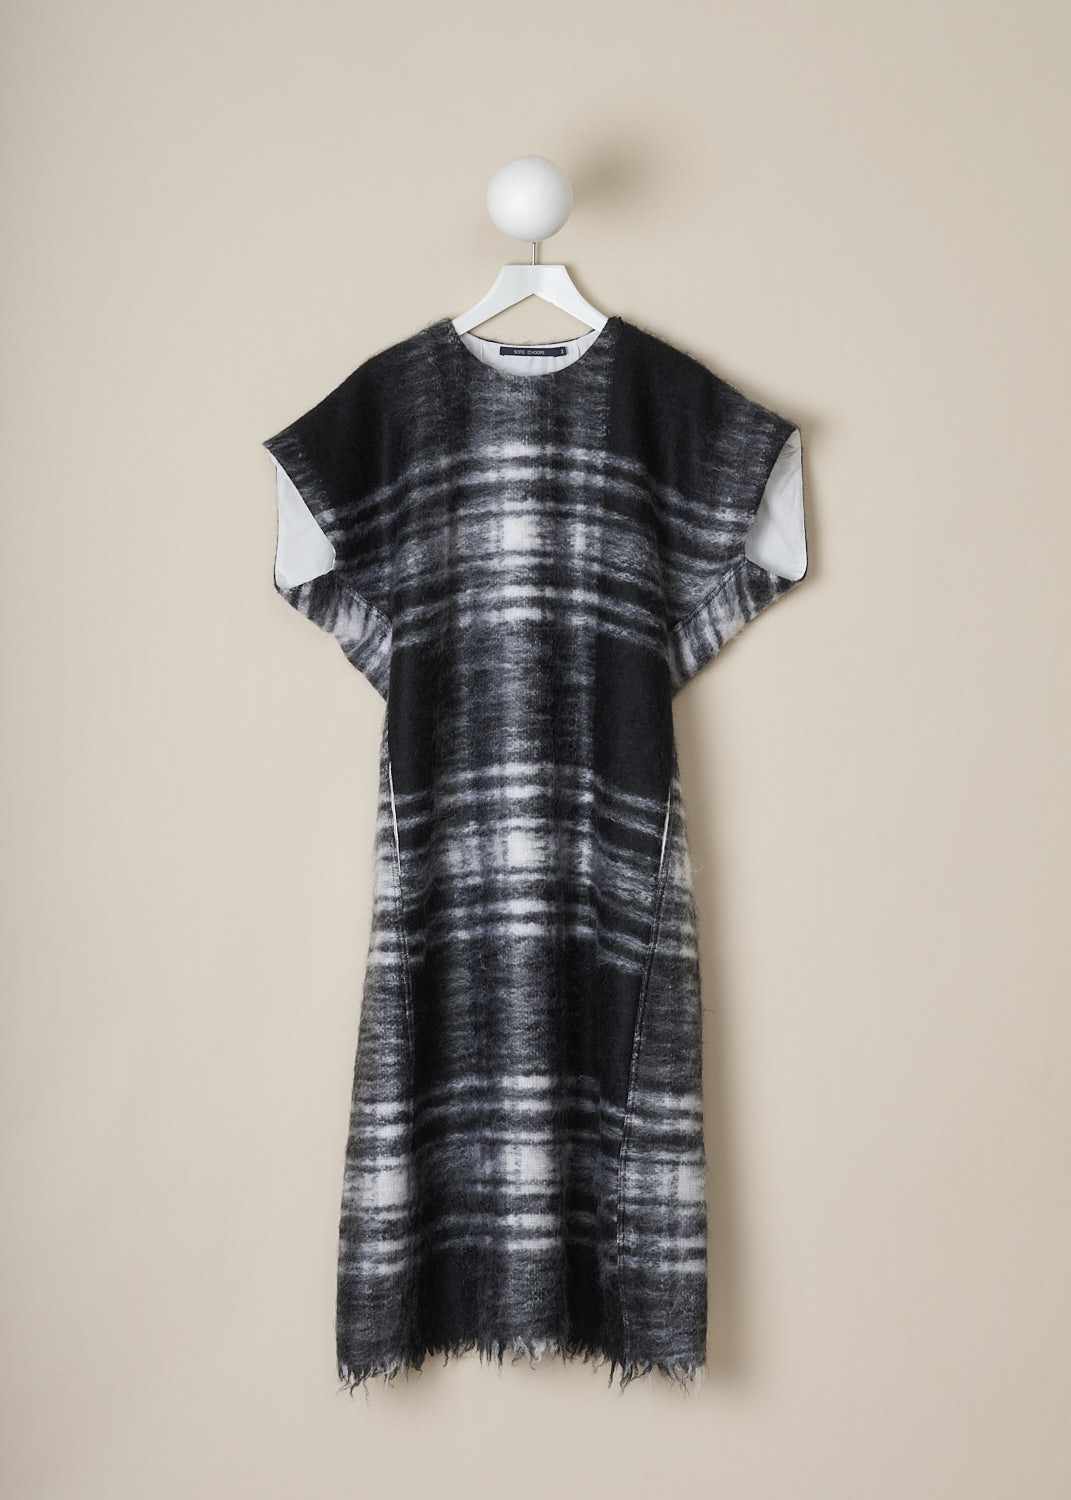 SOFIE Dâ€™HOORE, BLACK AND WHITE TARTAN DORIA DRESS, DORIA_WOMO_BLACK_TARTAN, Black, White, Print, Front, This black and white tartan Doria maxi dress has a round neckline with a concealed zip closure on the left shoulder. The dress has short cap sleeves. In the front, the dress has on-seam slanted pockets. The dress has a straight, raw edged hemline. The dress is fully lined. 
